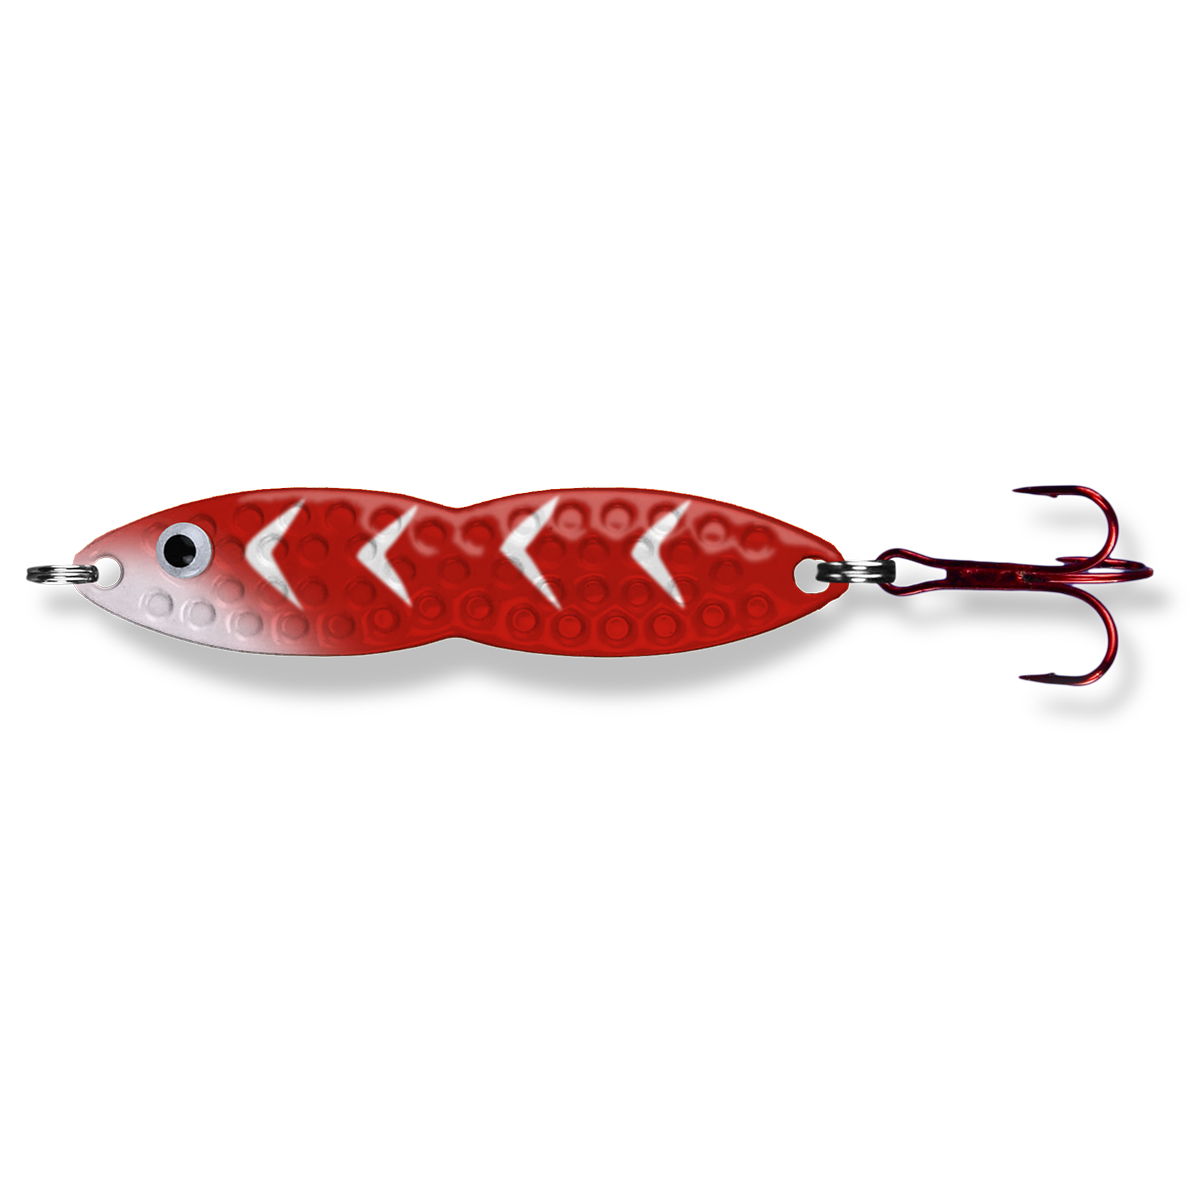 Pk Lures Flutterfish Crossover Spoon Color Red Dot Glow Weight 1/2 oz